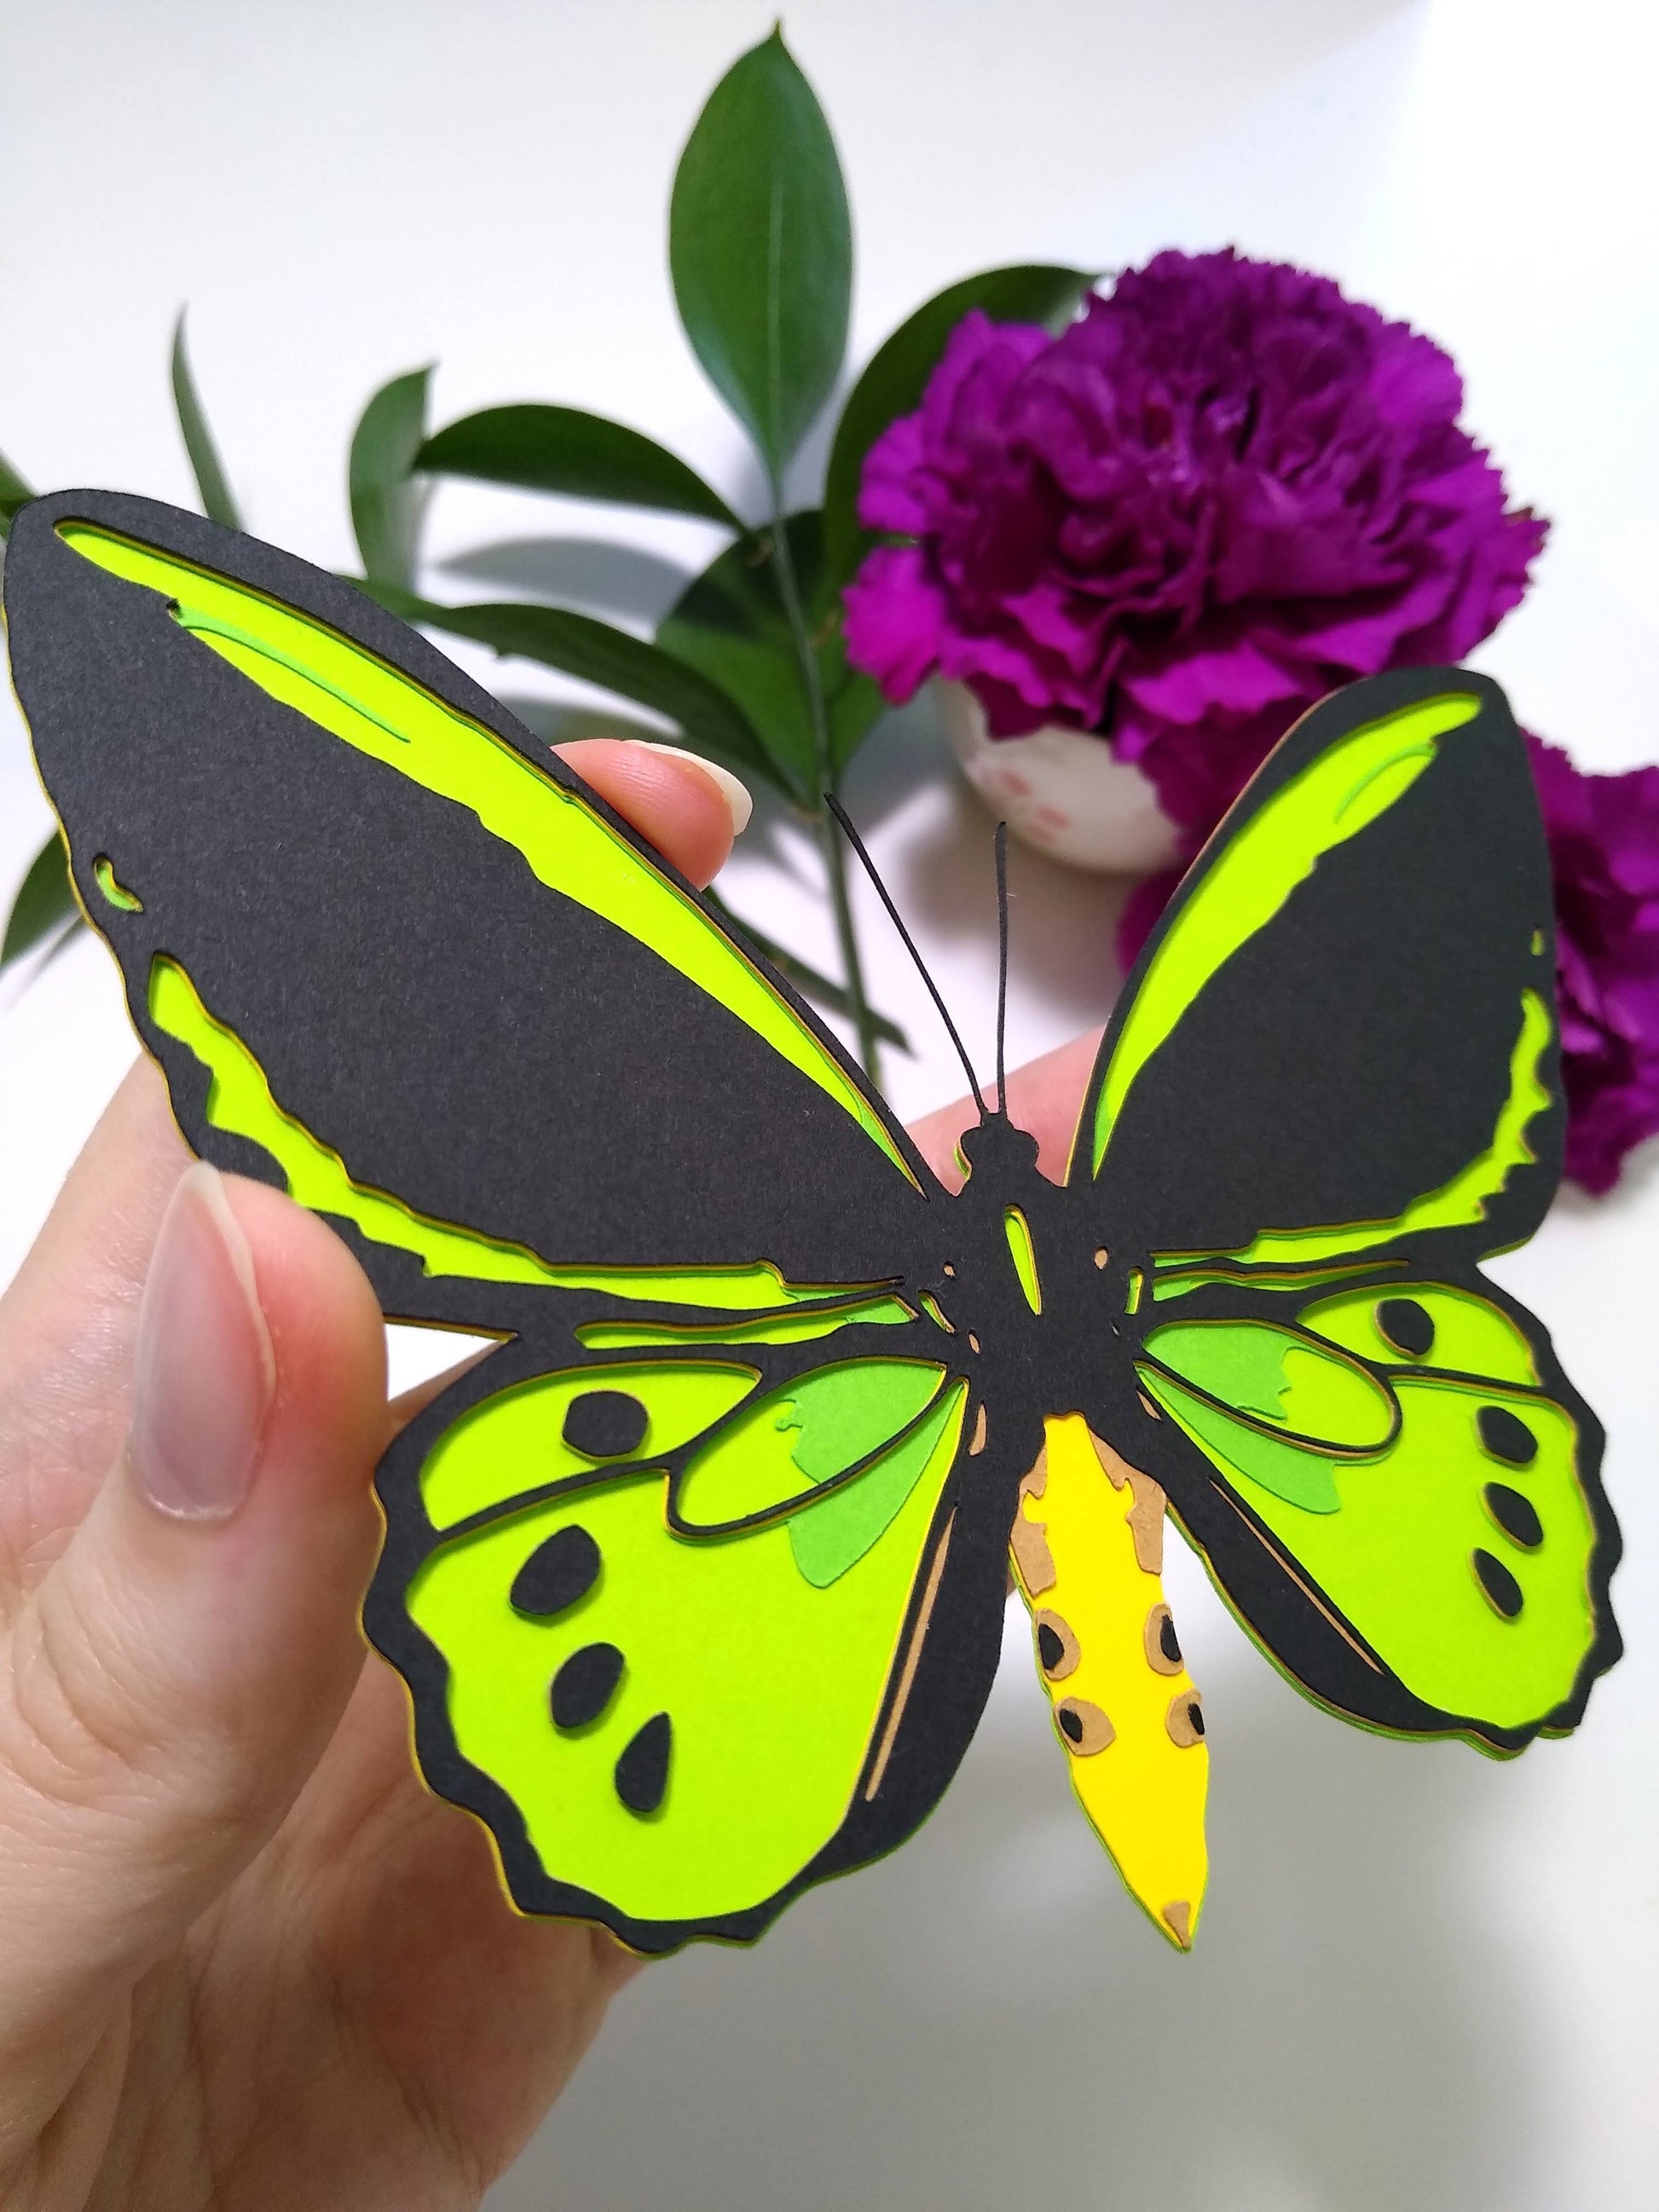 A hand holds a multi-layered paper butterfly to the camera, in the design of the front of a Cairns Birdwing butterfly. In the background are leaves and two purple flower.